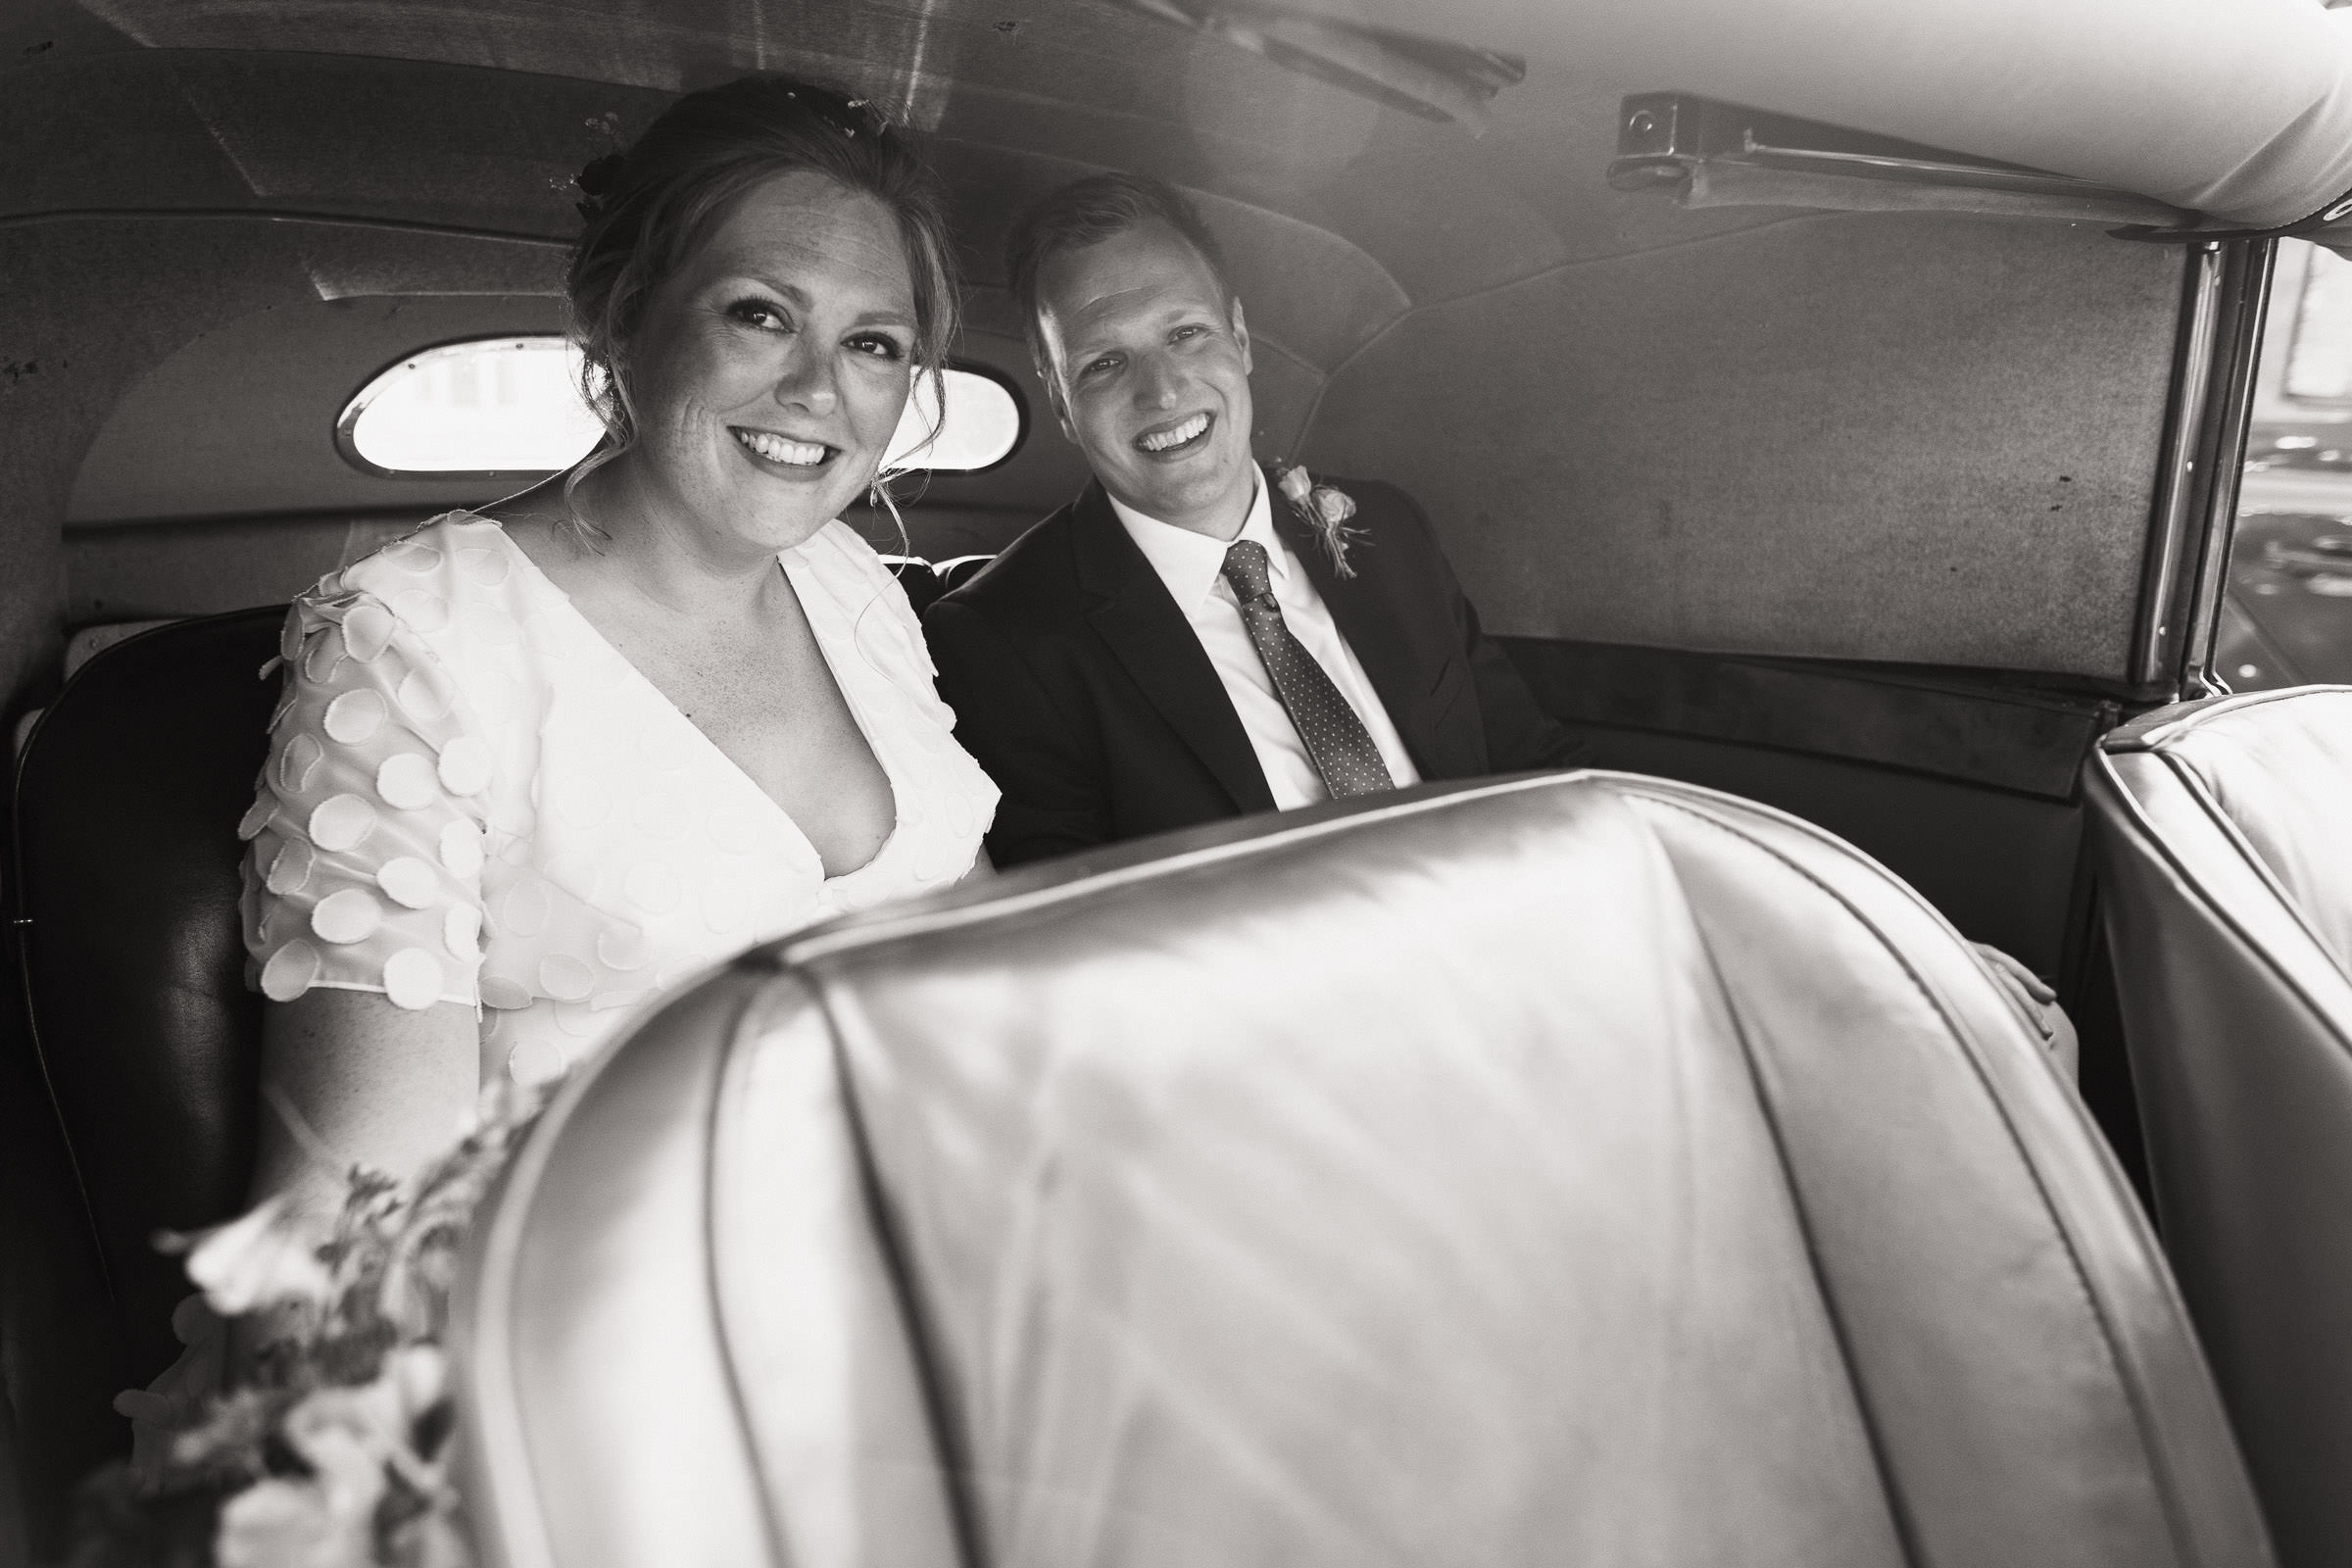 A bride and groom smile at the camera in the back of a car, 1951 Jaguar. After their wedding at the church in Thaxted in Essex. Vagabond wedding dress called Anouk, Circle motif chiffon A line gown with deep V neckline with buttons in the front.